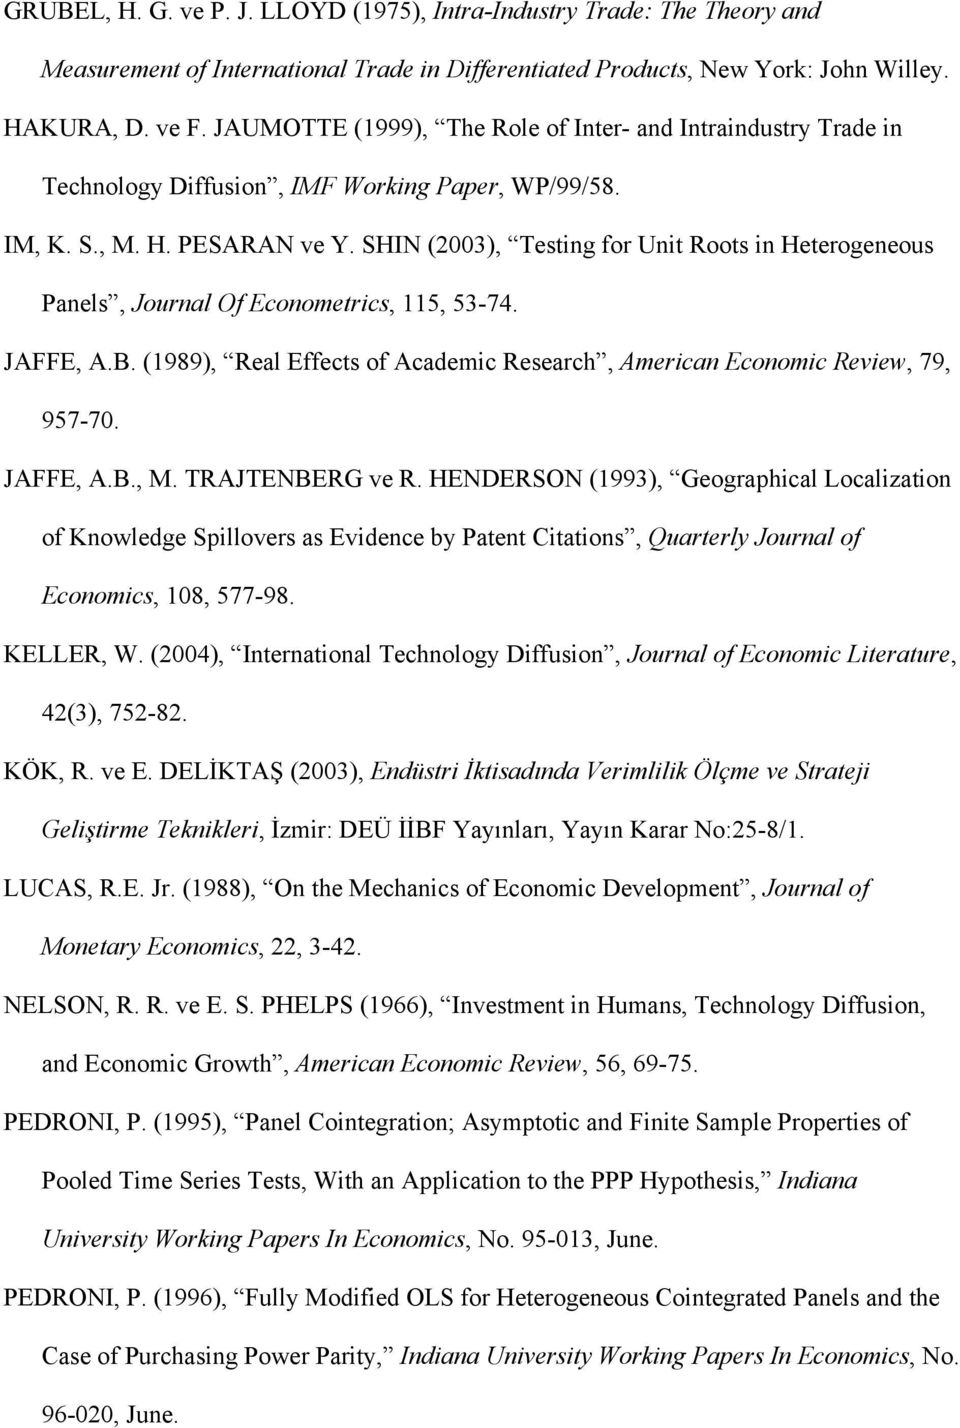 SHIN (2003), Testng for Unt Roots n Heterogeneous Panels, Journal Of Econometrcs, 115, 53-74. JAFFE, A.B. (1989), Real Effects of Academc Research, Amercan Economc Revew, 79, 957-70. JAFFE, A.B., M.